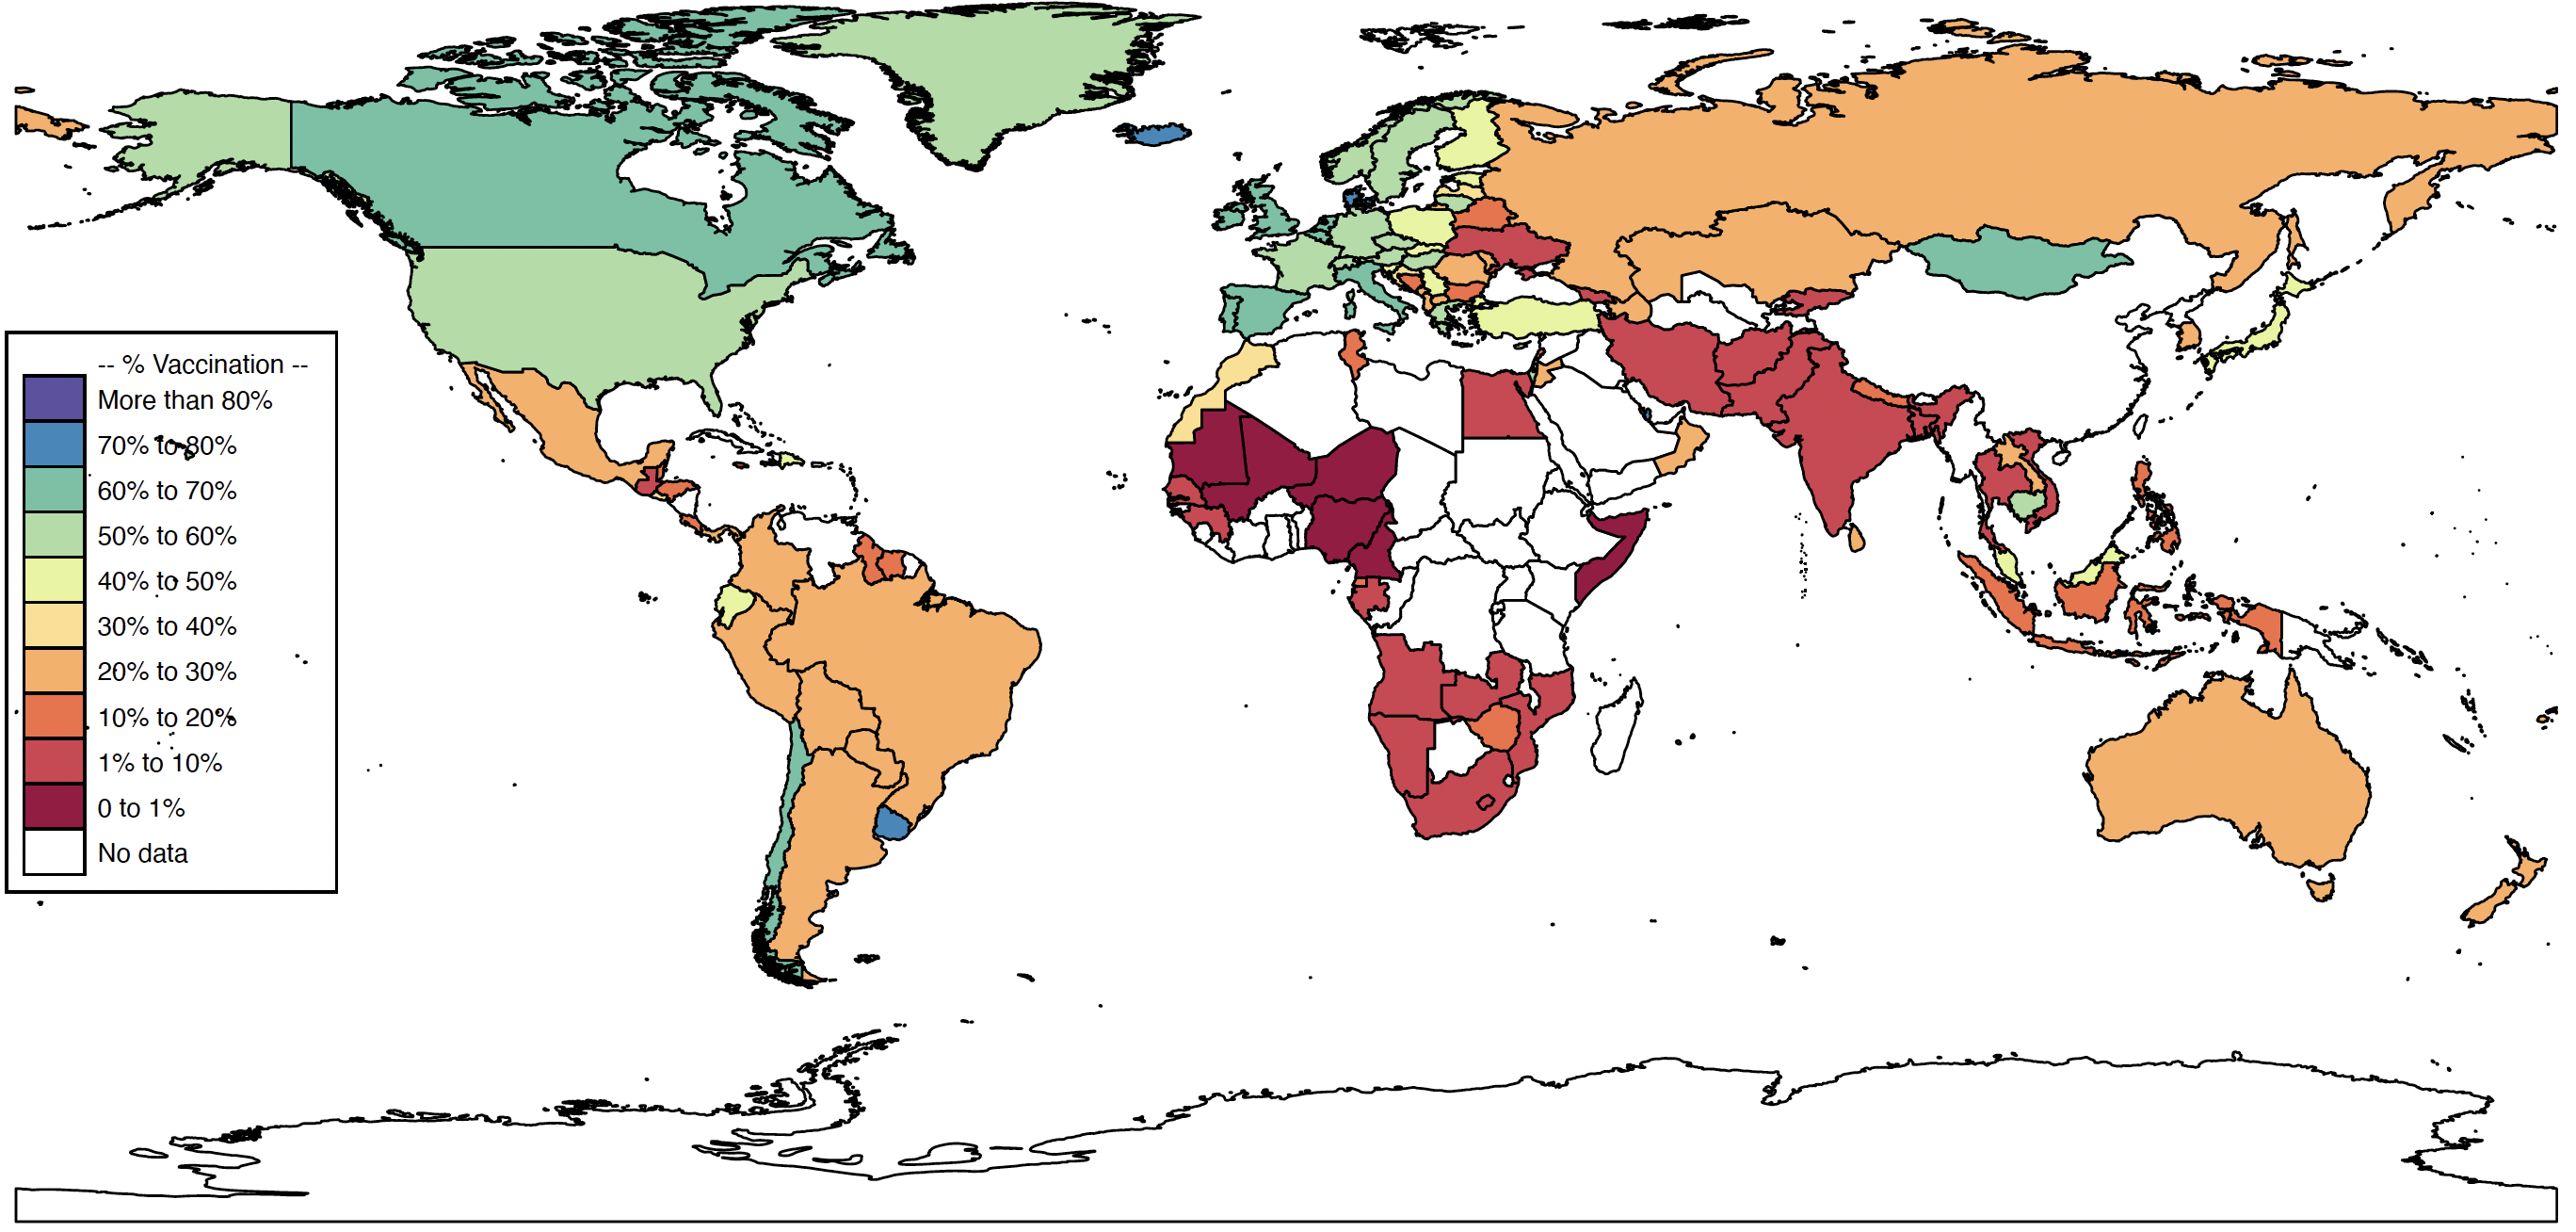 Figure 1 Worldwide share of population fully vaccinated by August 2021